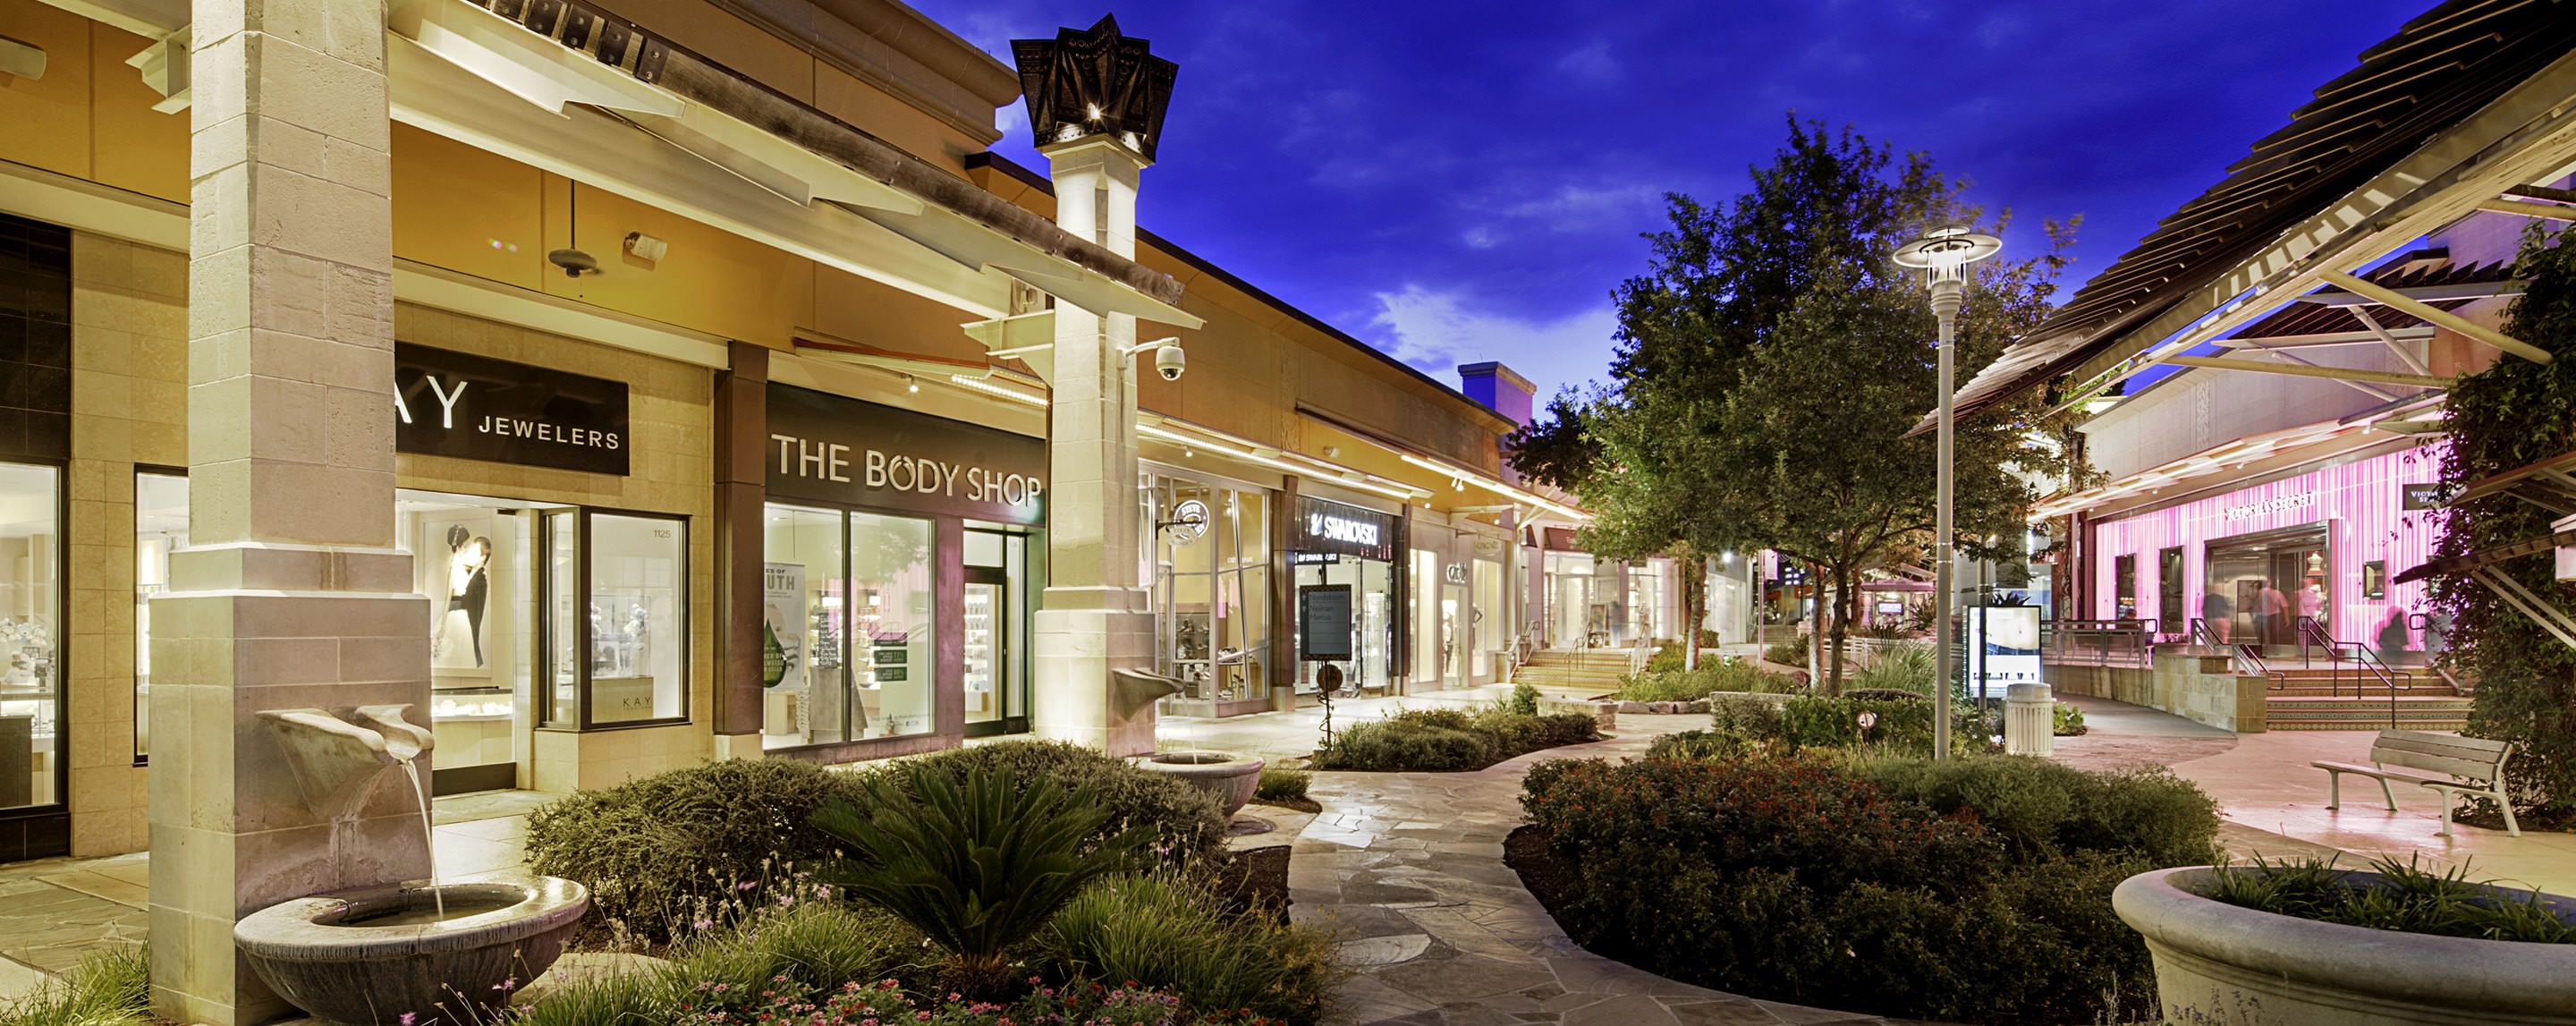 The Shops at La Cantera Coupons near me in San Antonio | 8coupons